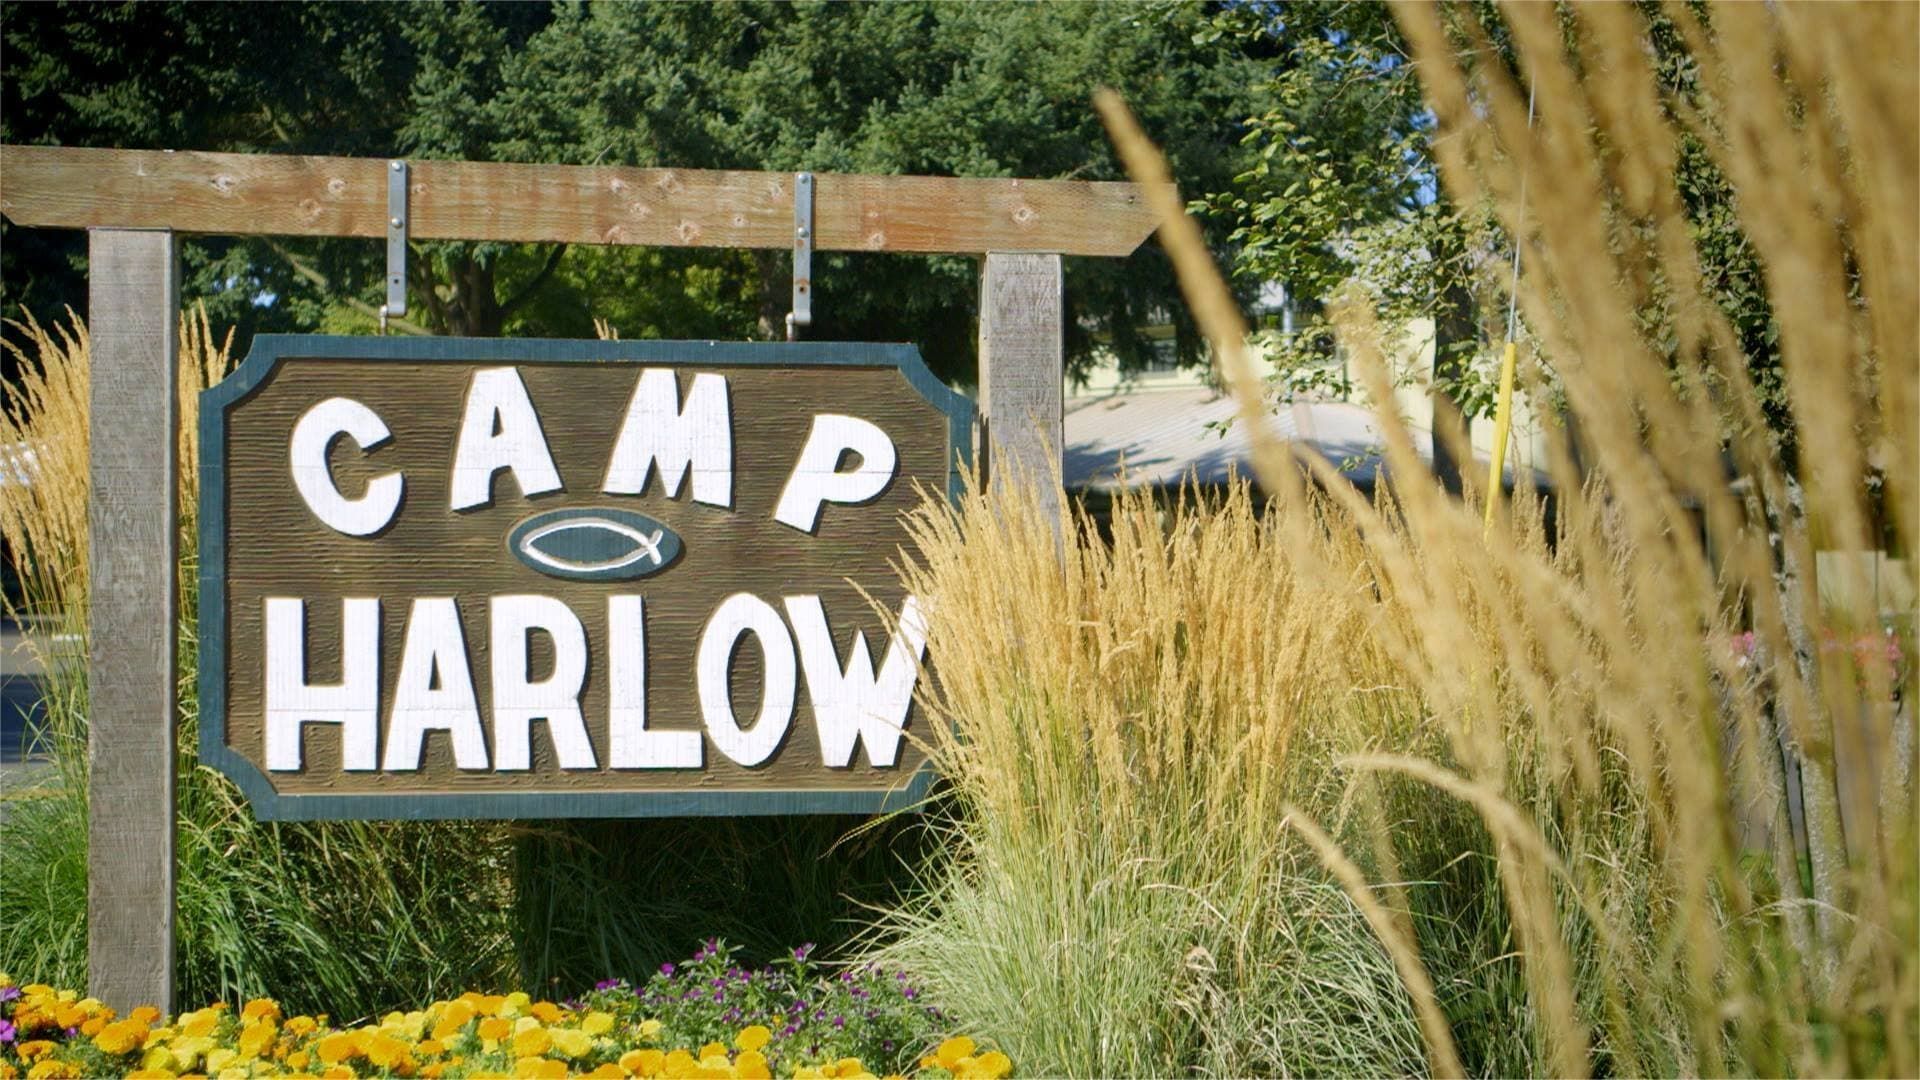 Camp Harlow background